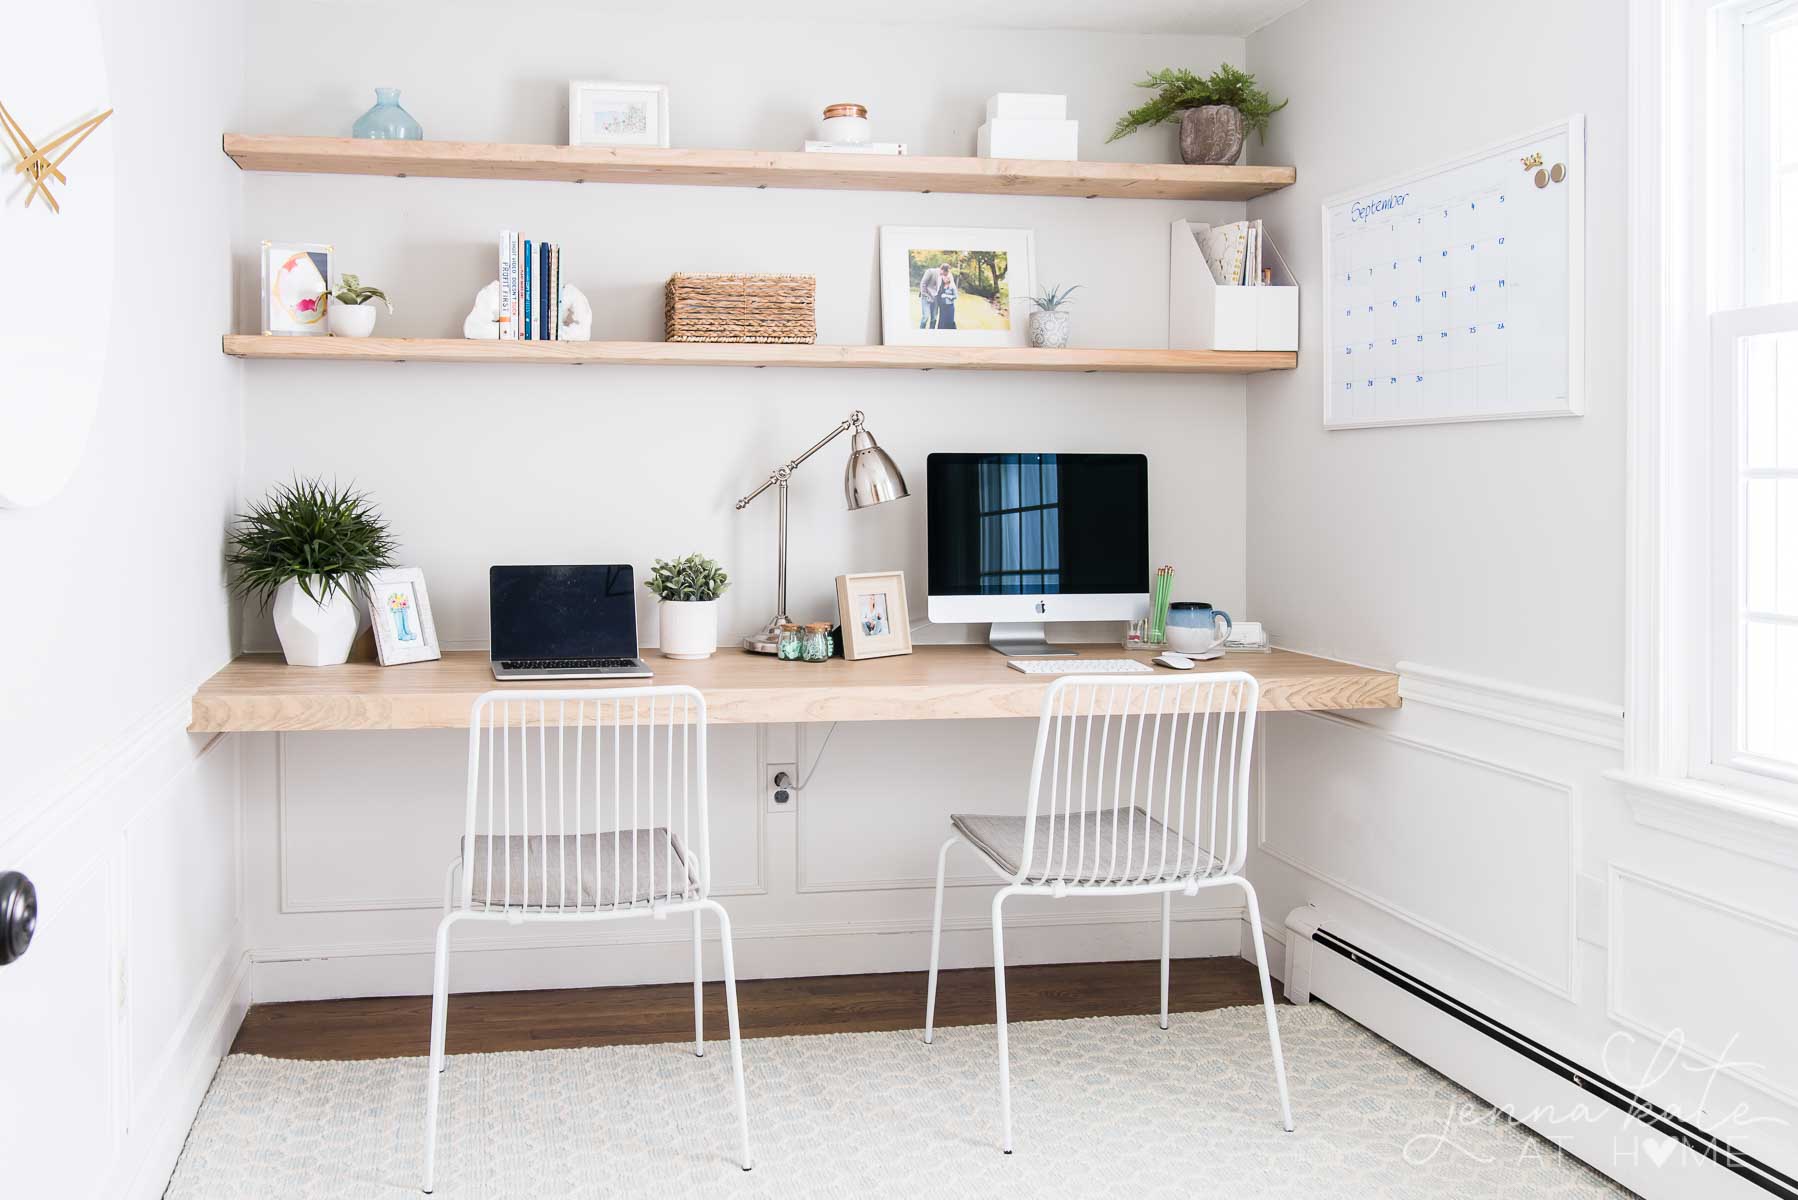 White Floating Desk with Storage